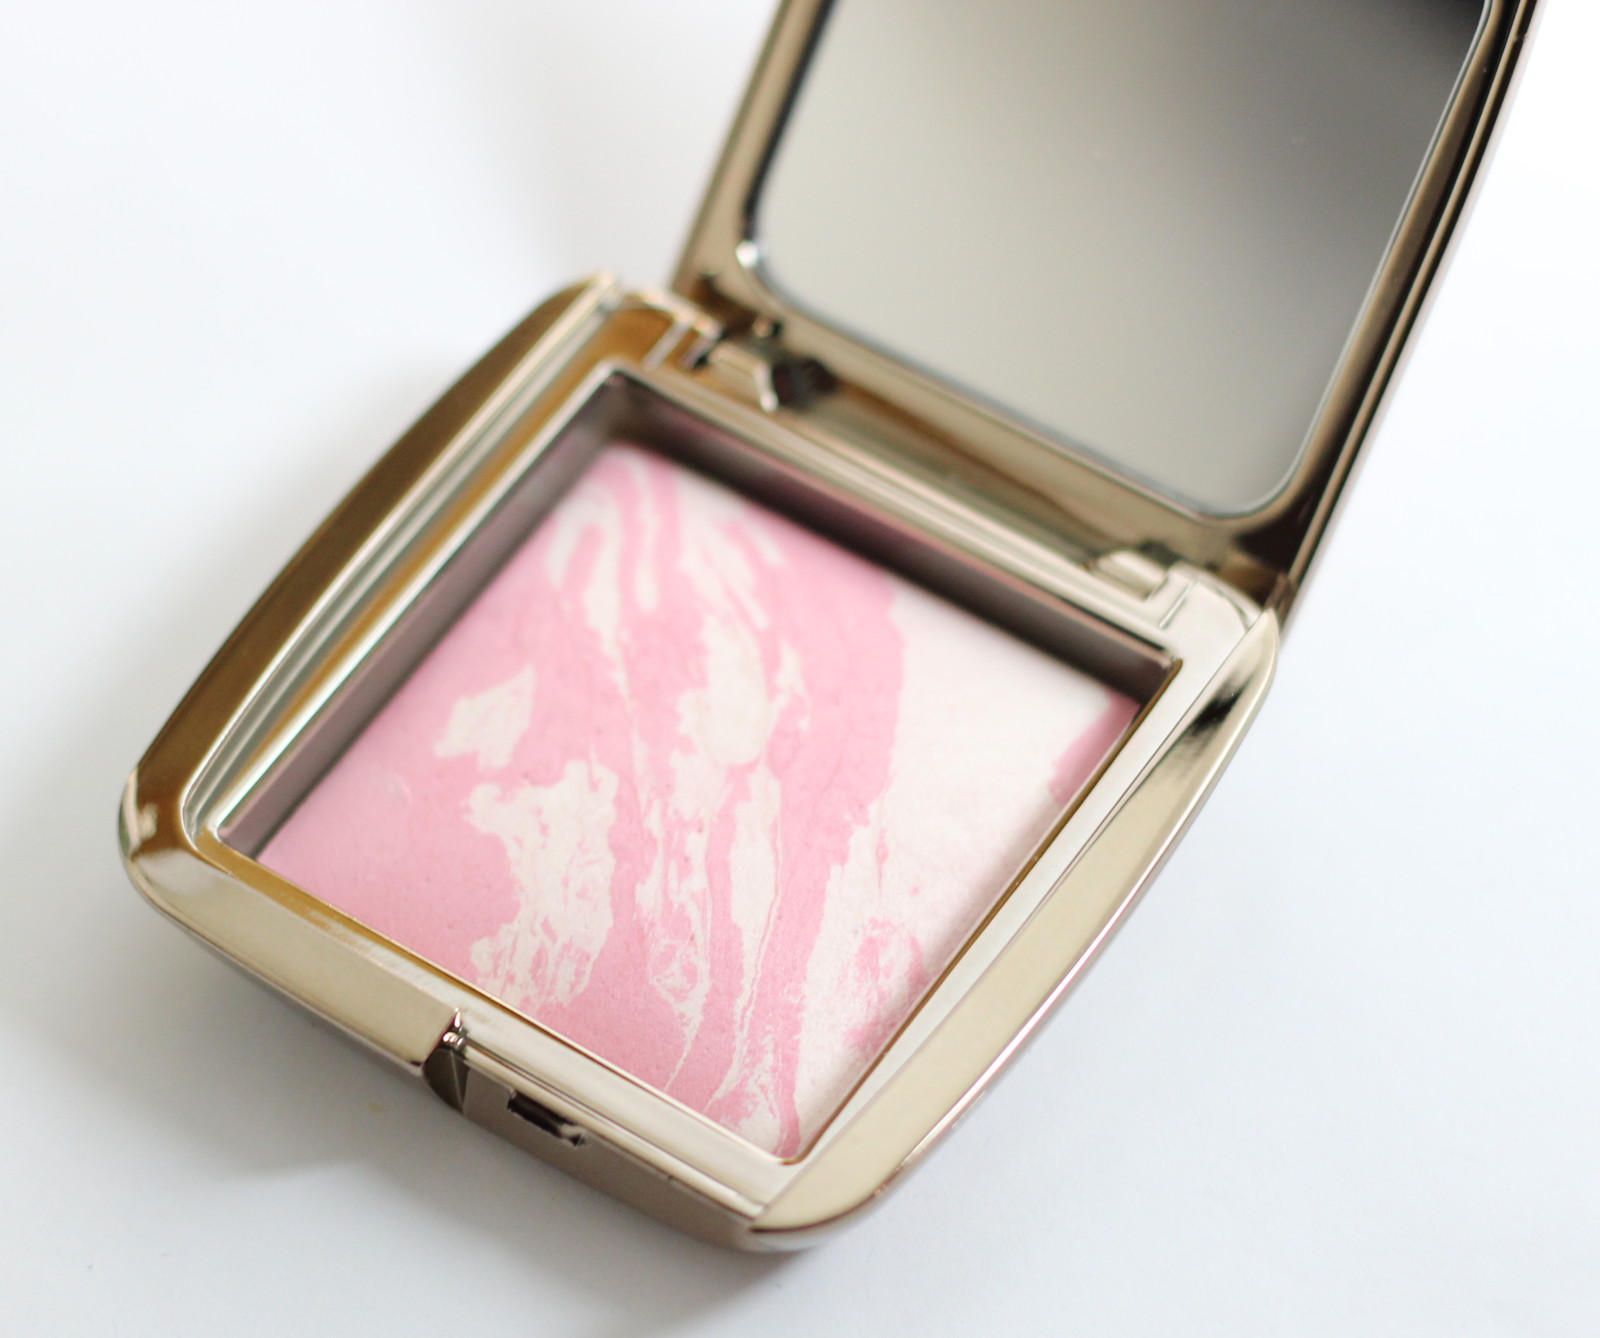 Hourglass Ambient Lighting Blush in Ethereal Glow